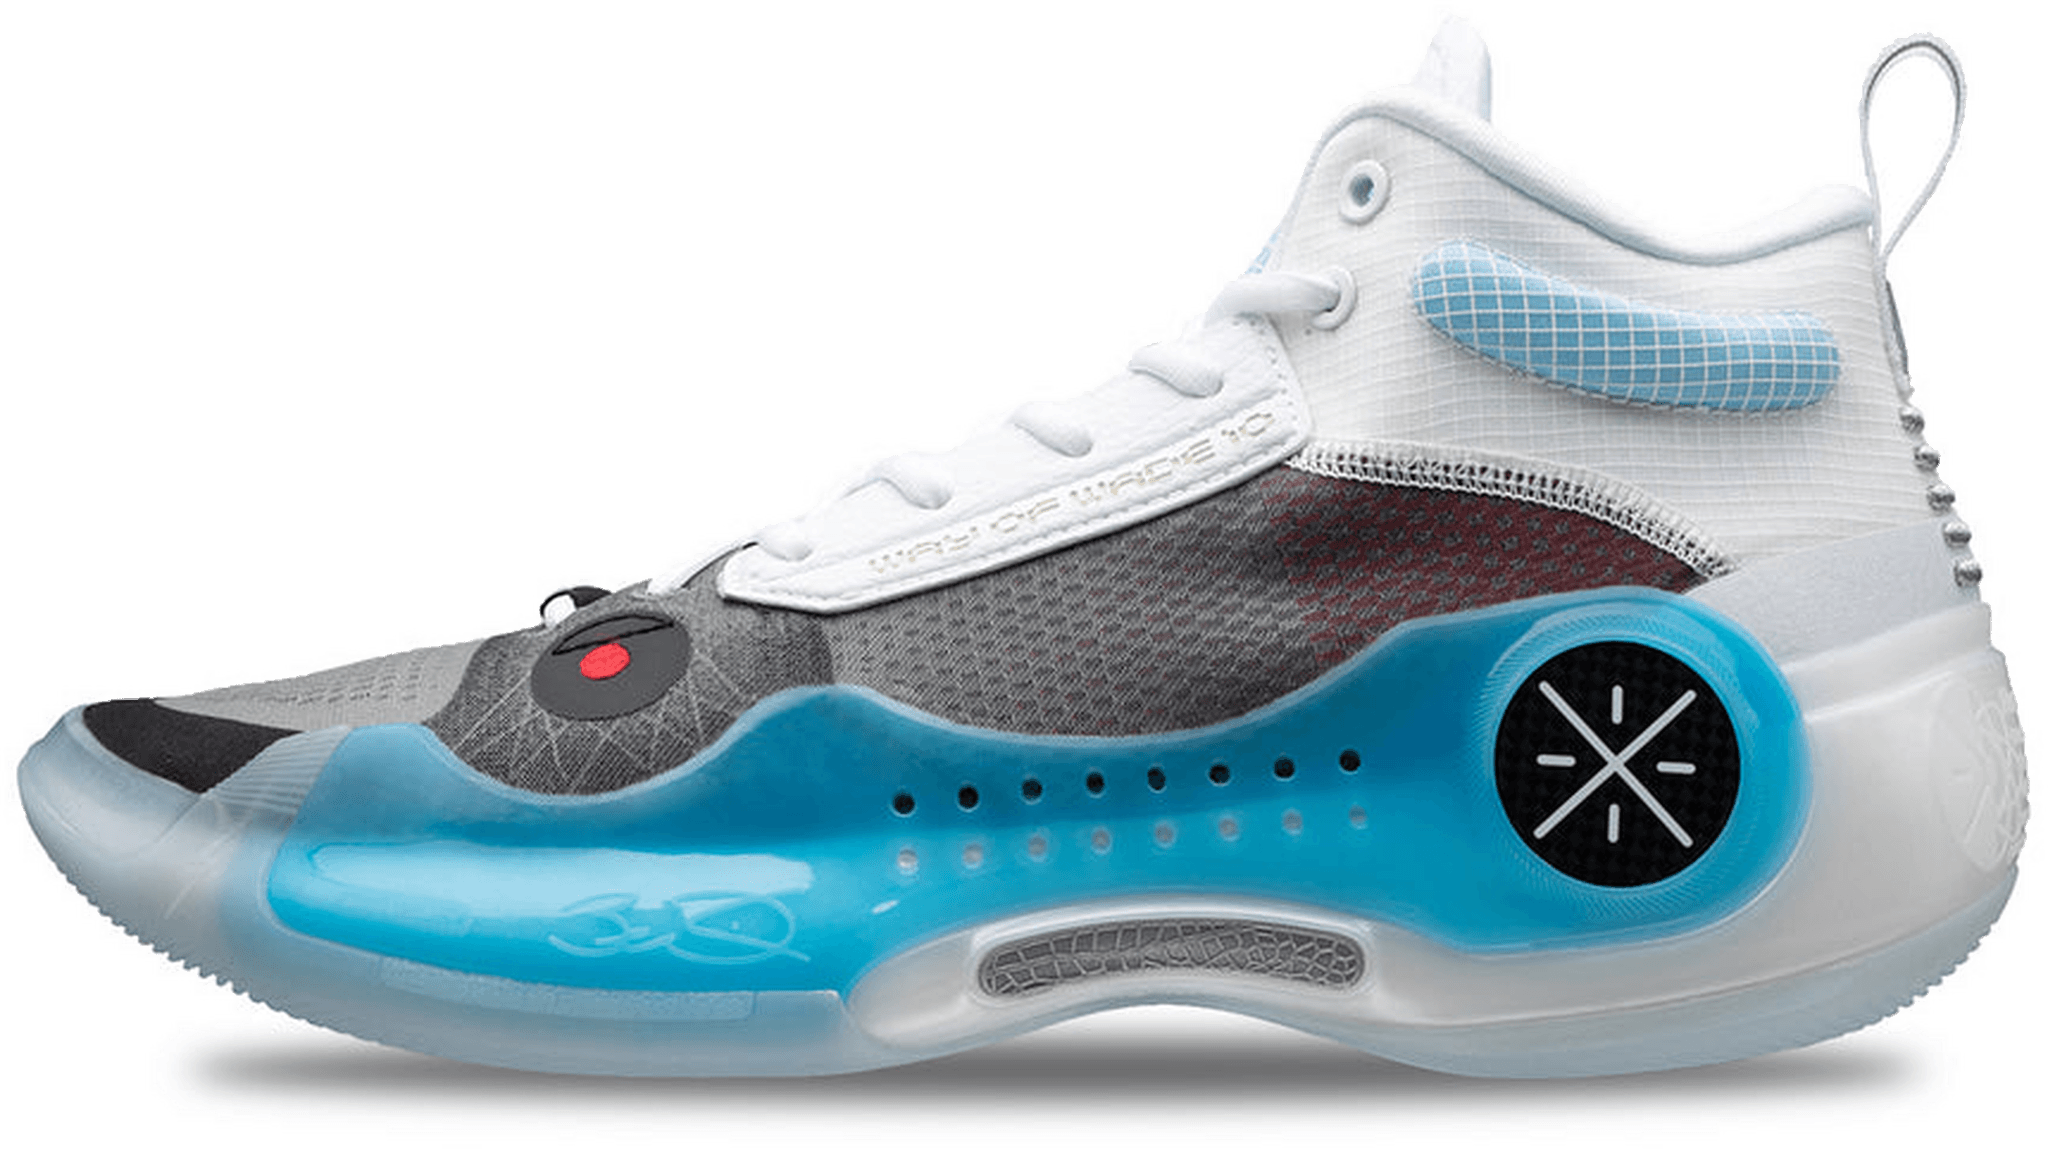 Li-Ning Way of Wade 10 Colorways - 9 Styles Starting from $225.00